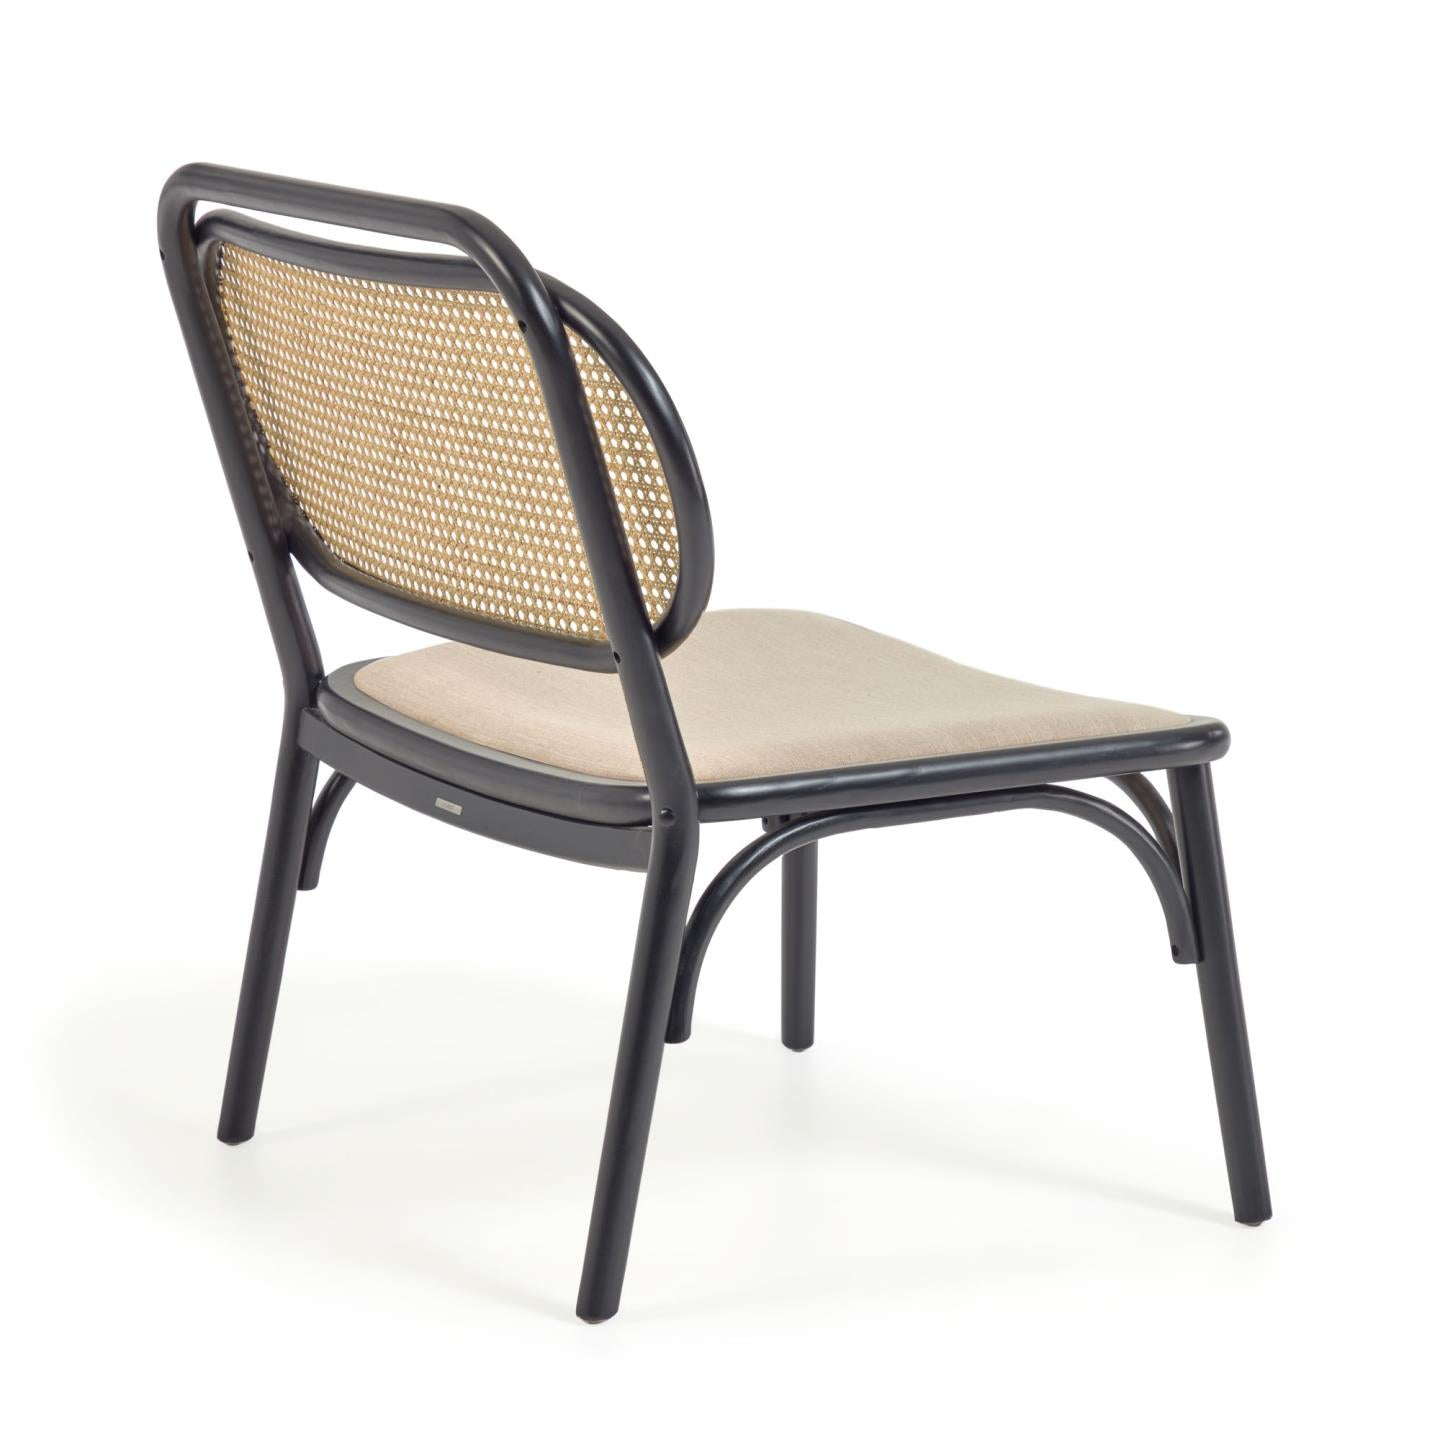 Doriane solid elm easy chair with black lacquer finish and upholstered seat